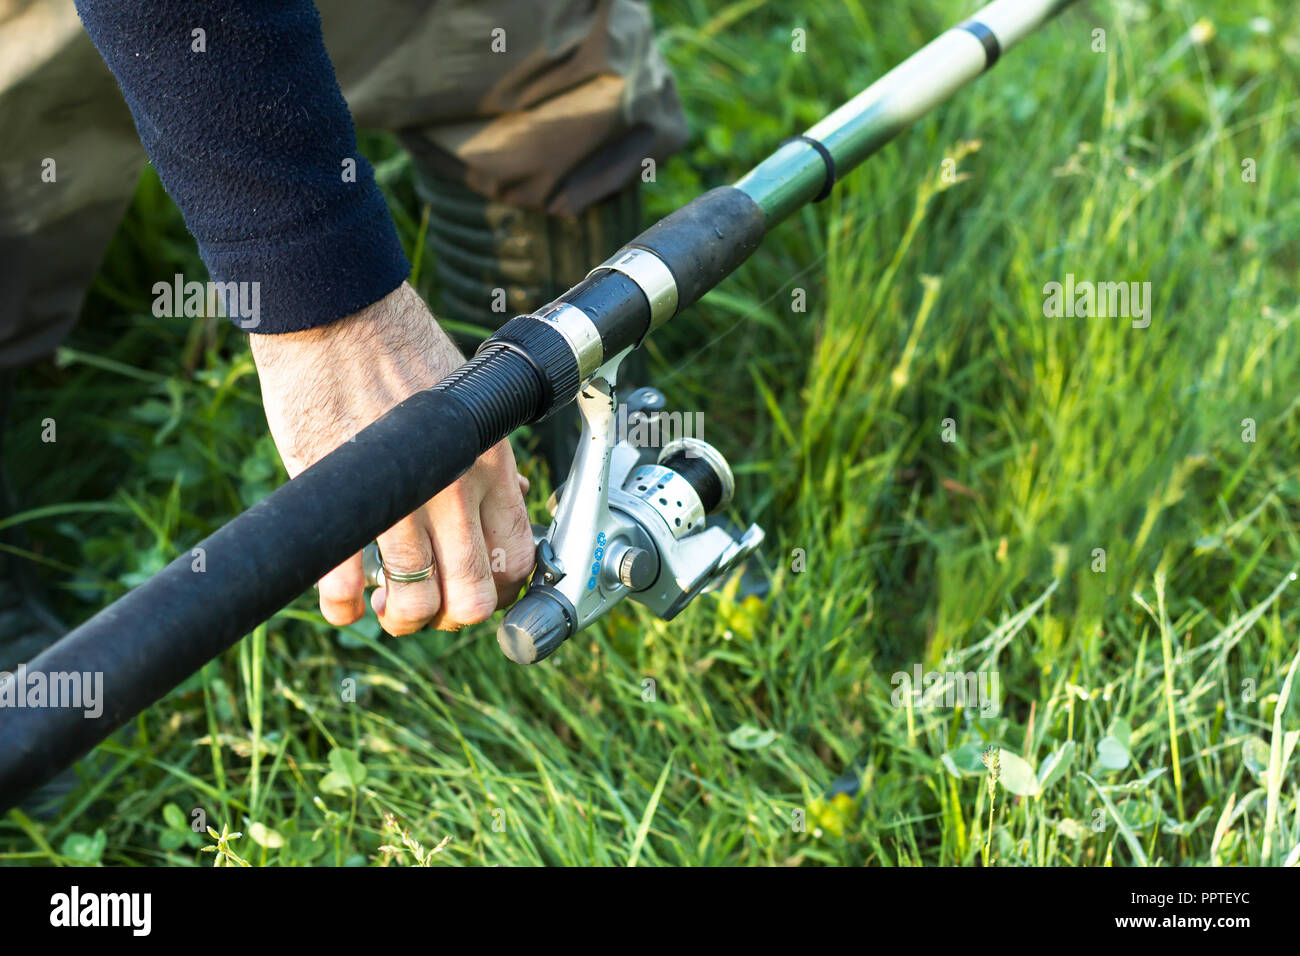 Ground fishing. The angler's hand adjusts the tension of the fishing line with the reel. Stock Photo